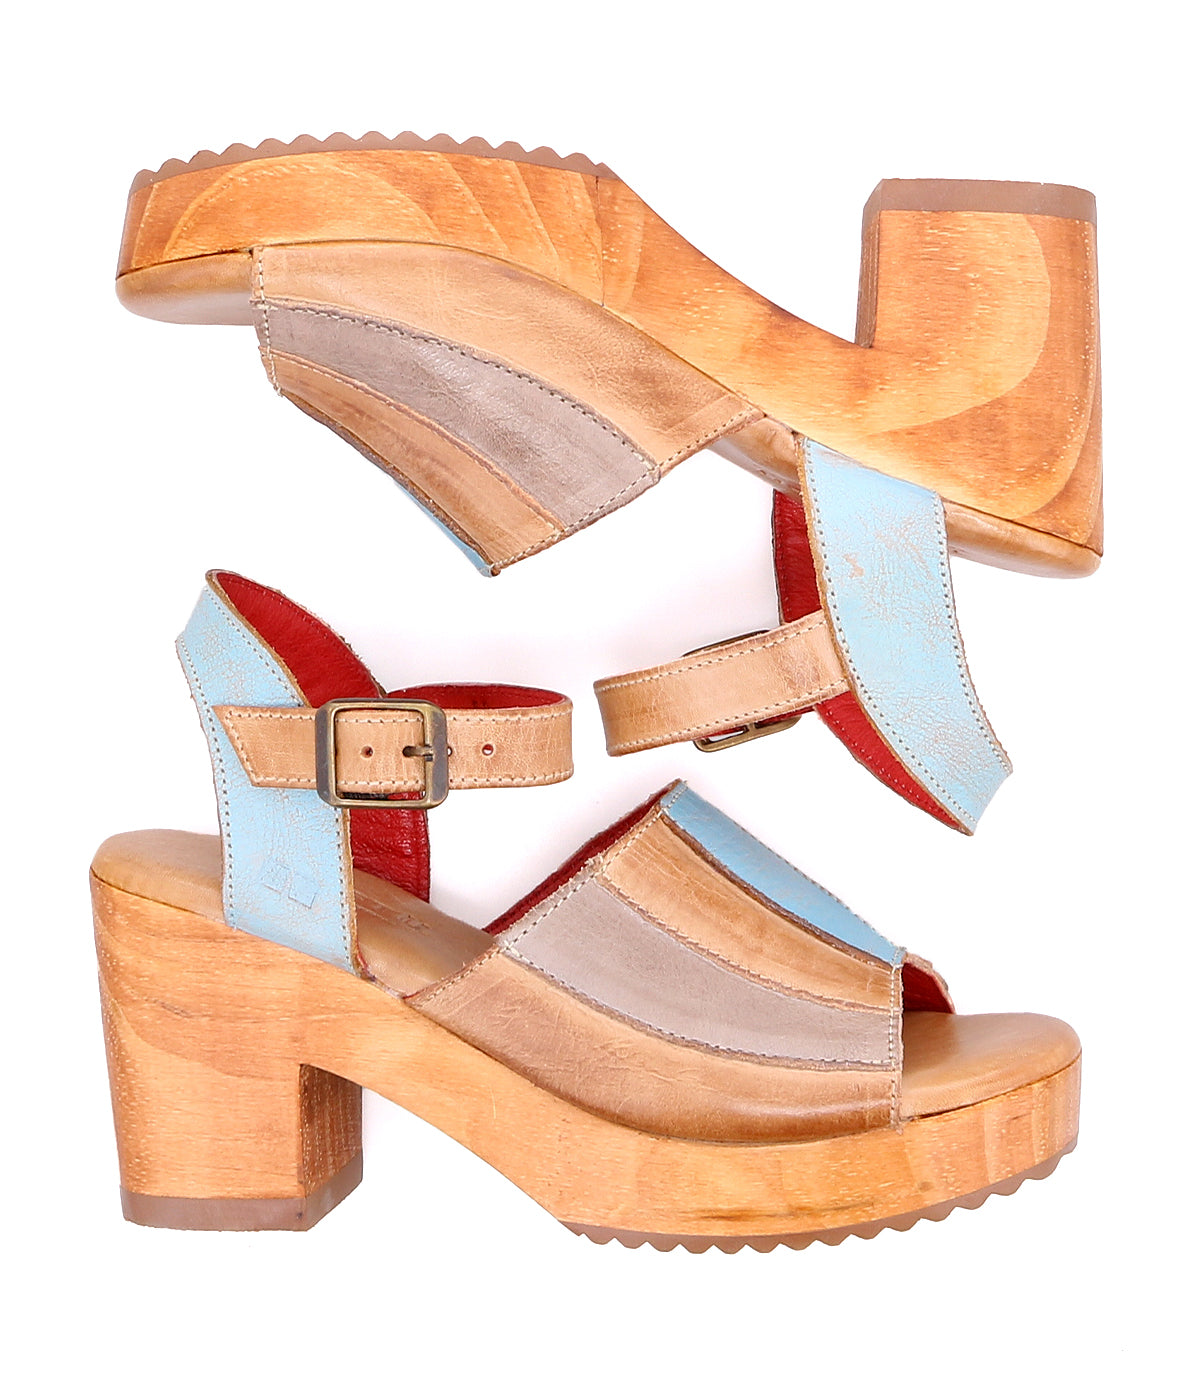 A pair of Jetsetter wooden sandals with blue straps and leather heels by Bed Stu.